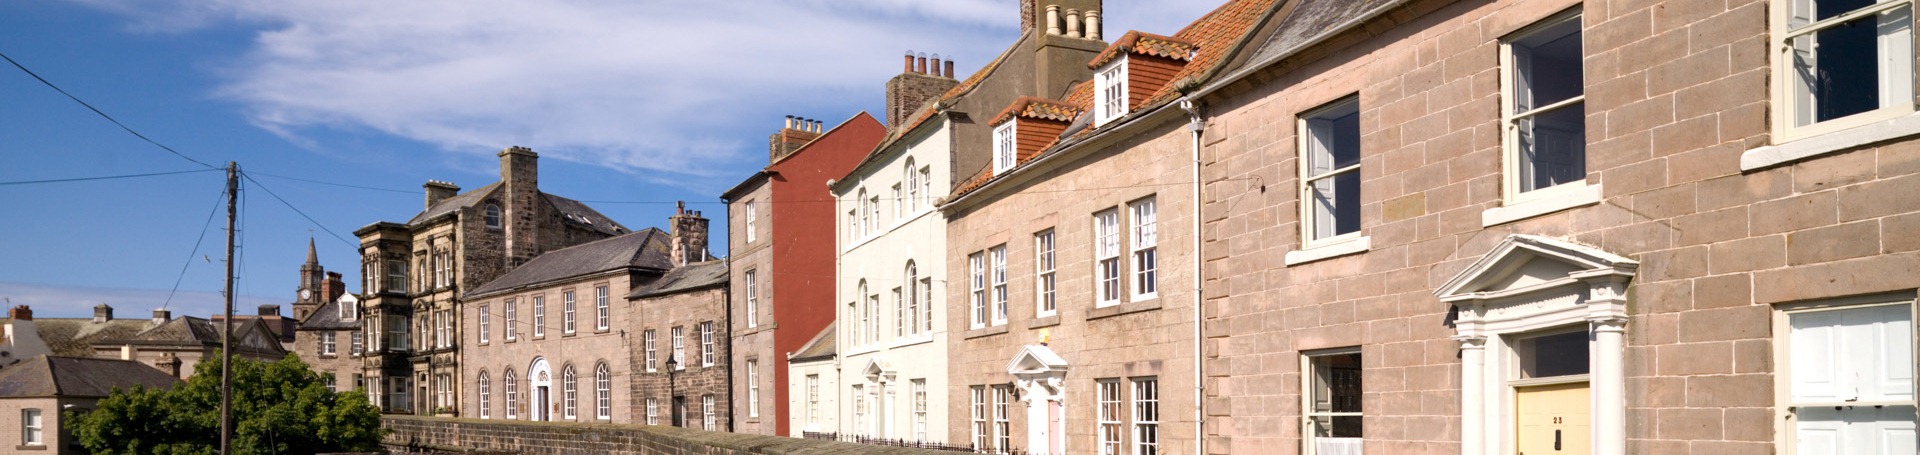 A row of historic buildings